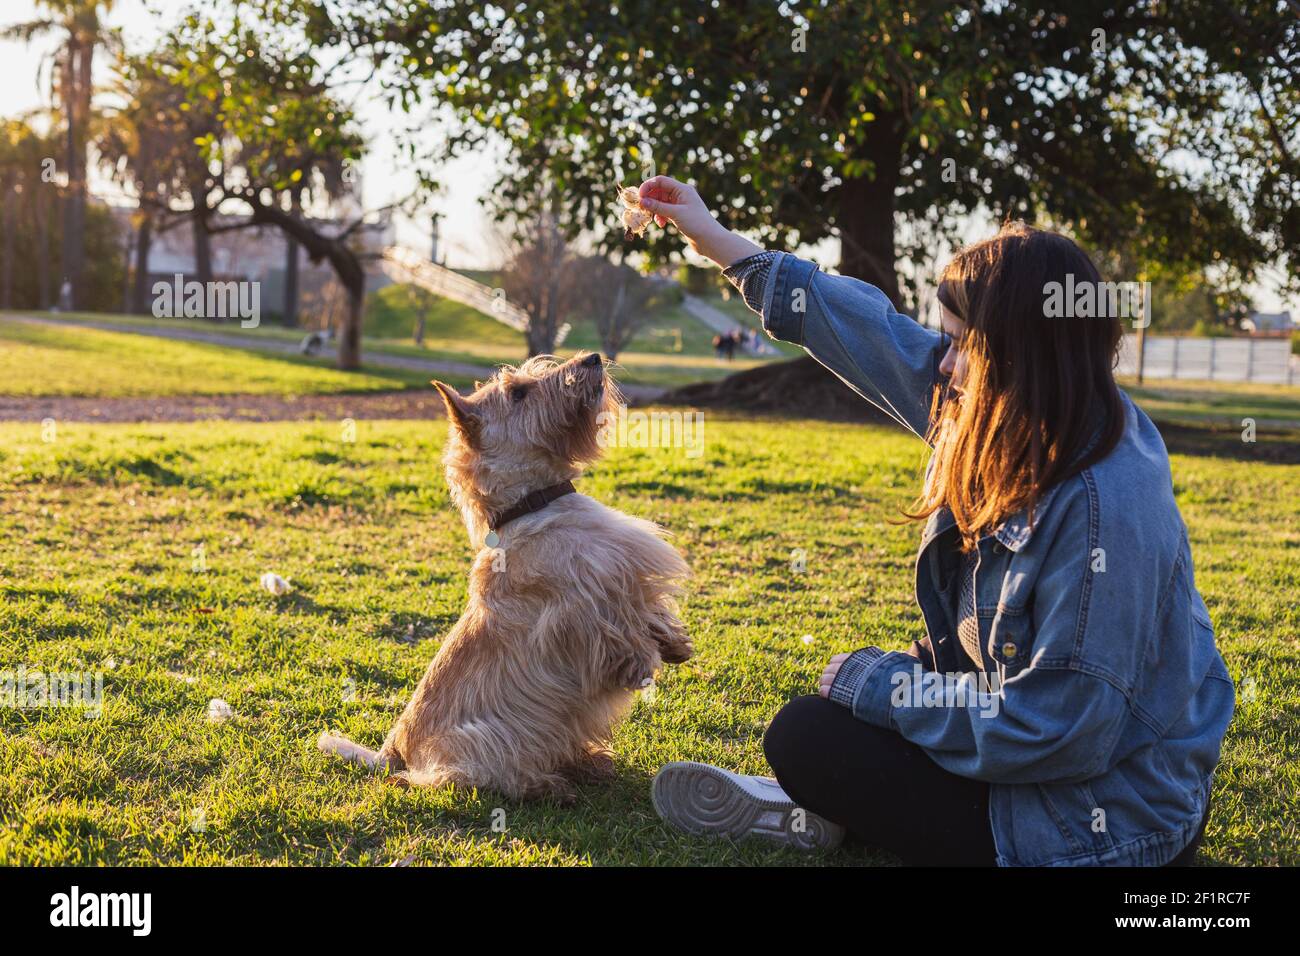 Girl playing with dog in city park at sunset in city park Stock Photo